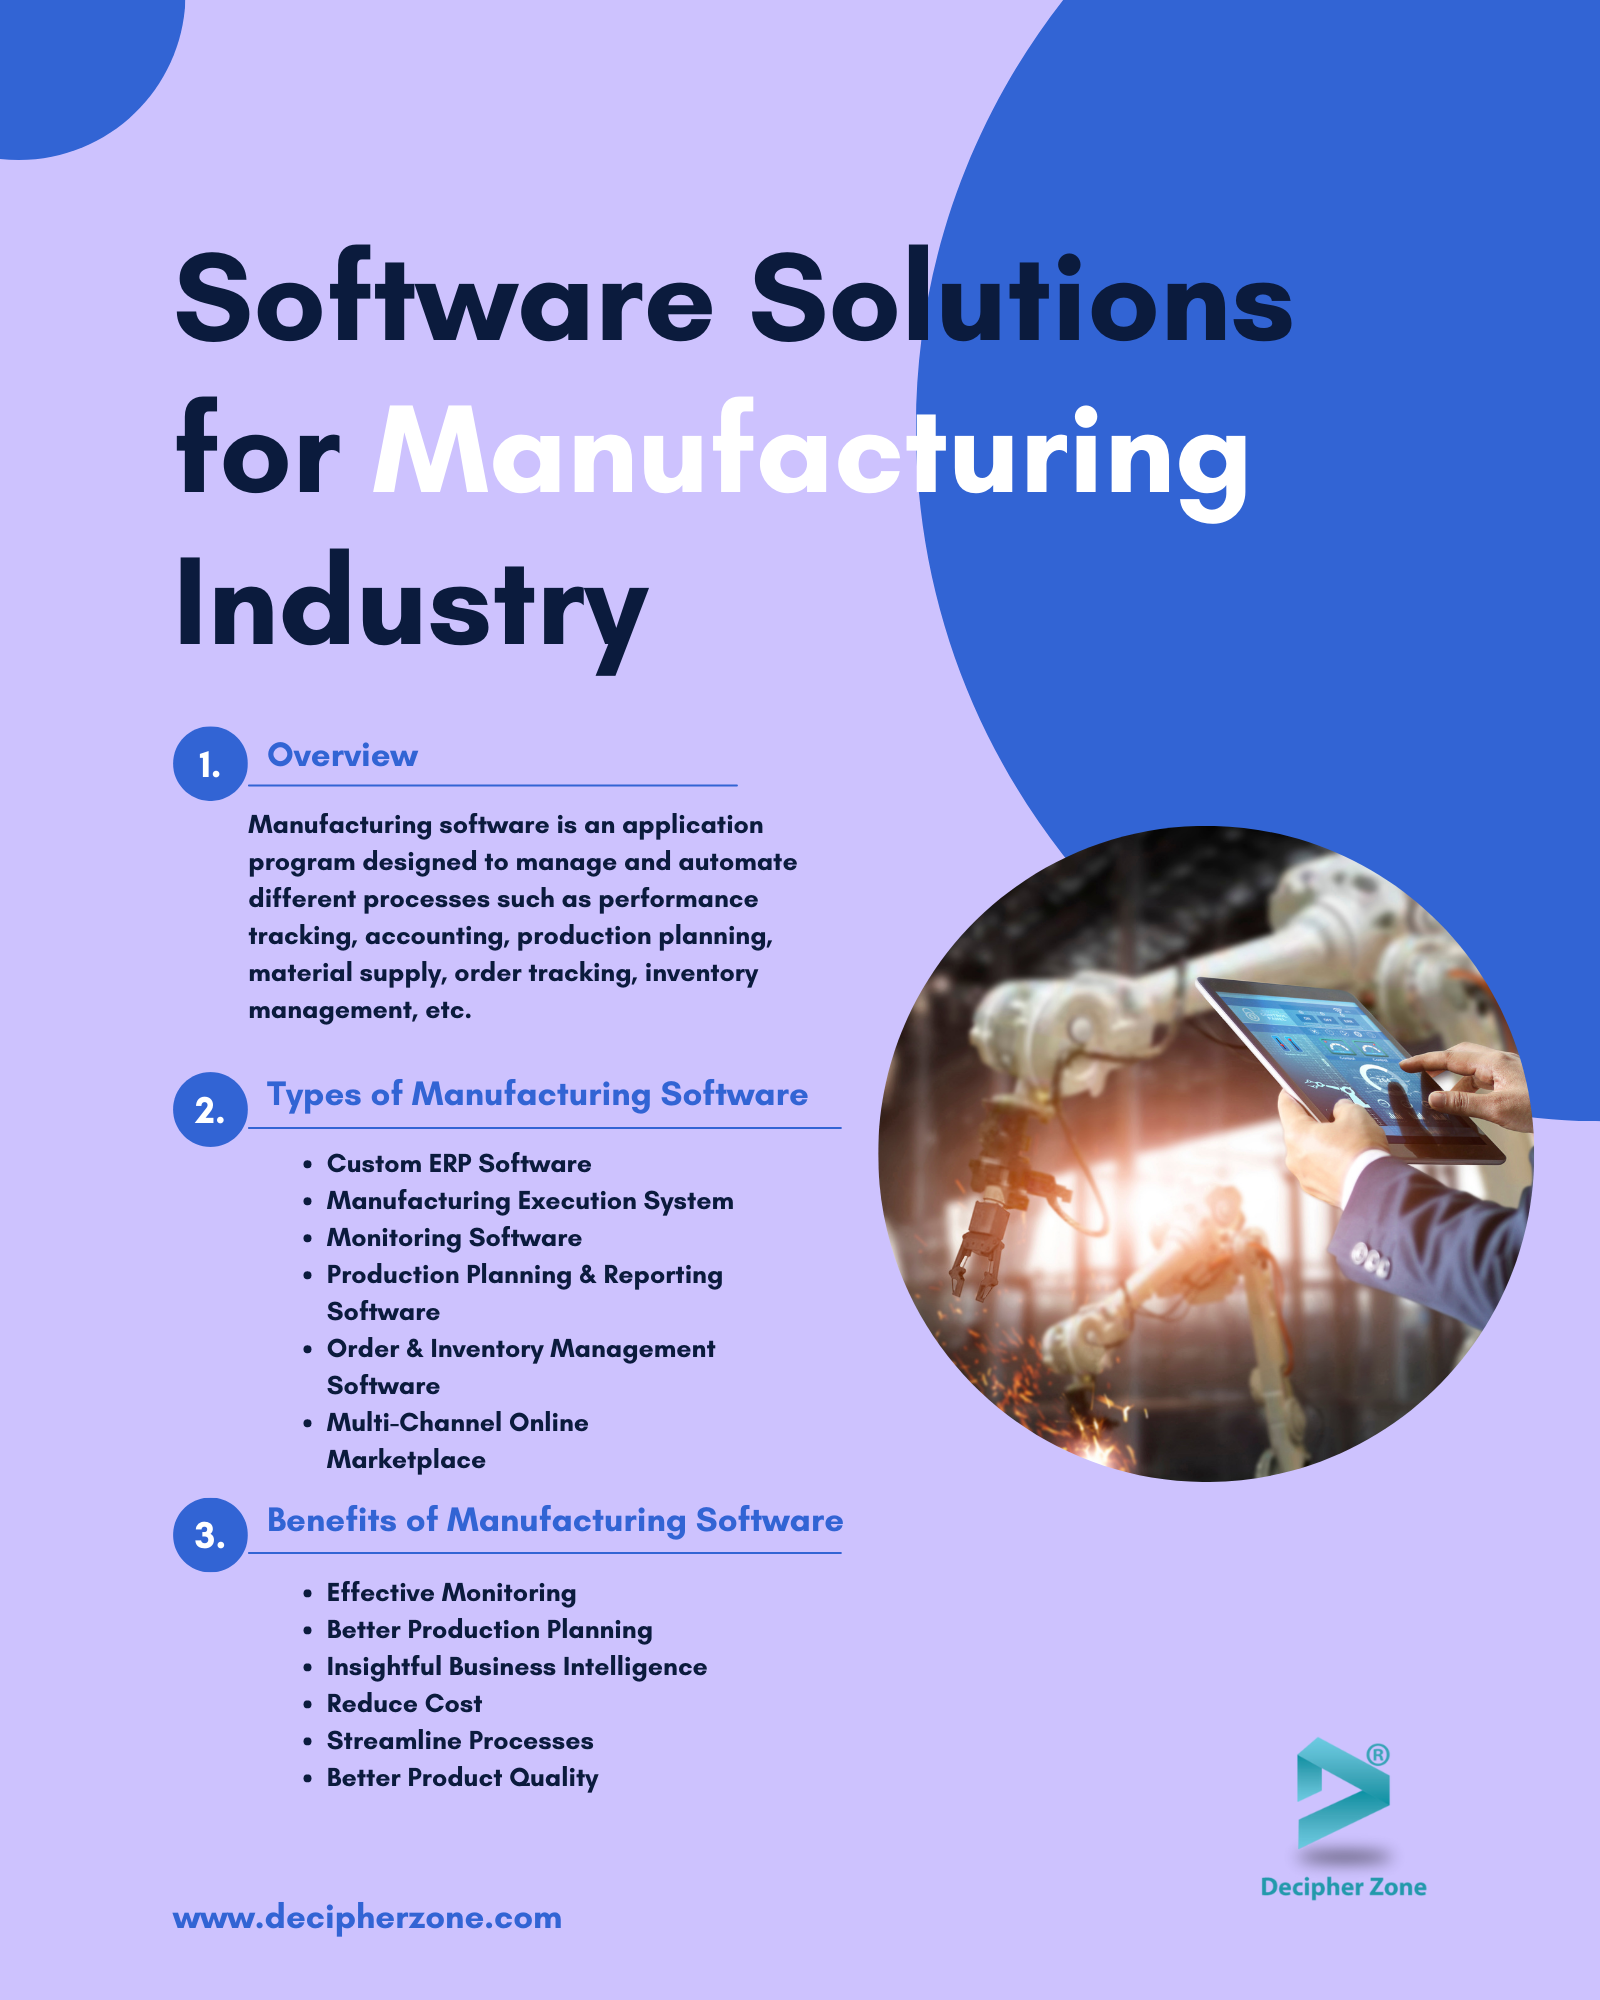 Software Solutions for Manufacturing Industry